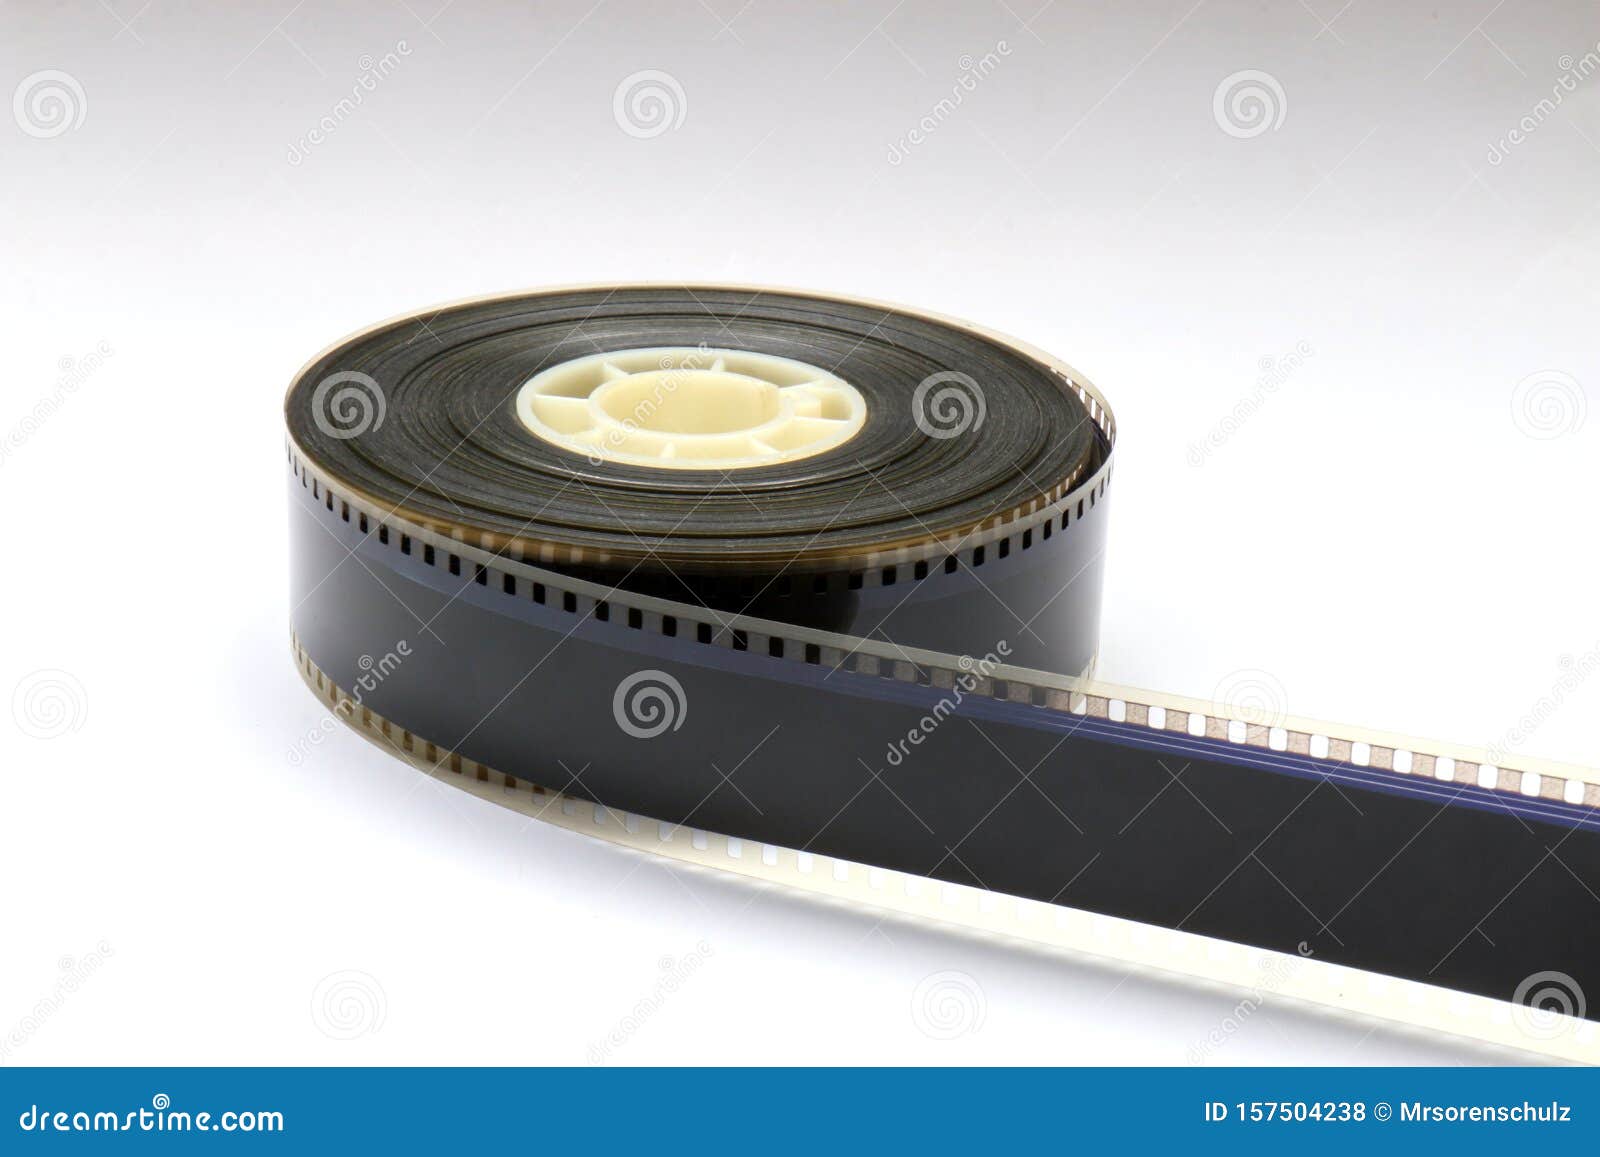 Small 35mm Movie Trailer Film Roll on a Bobby. this is a 2-3